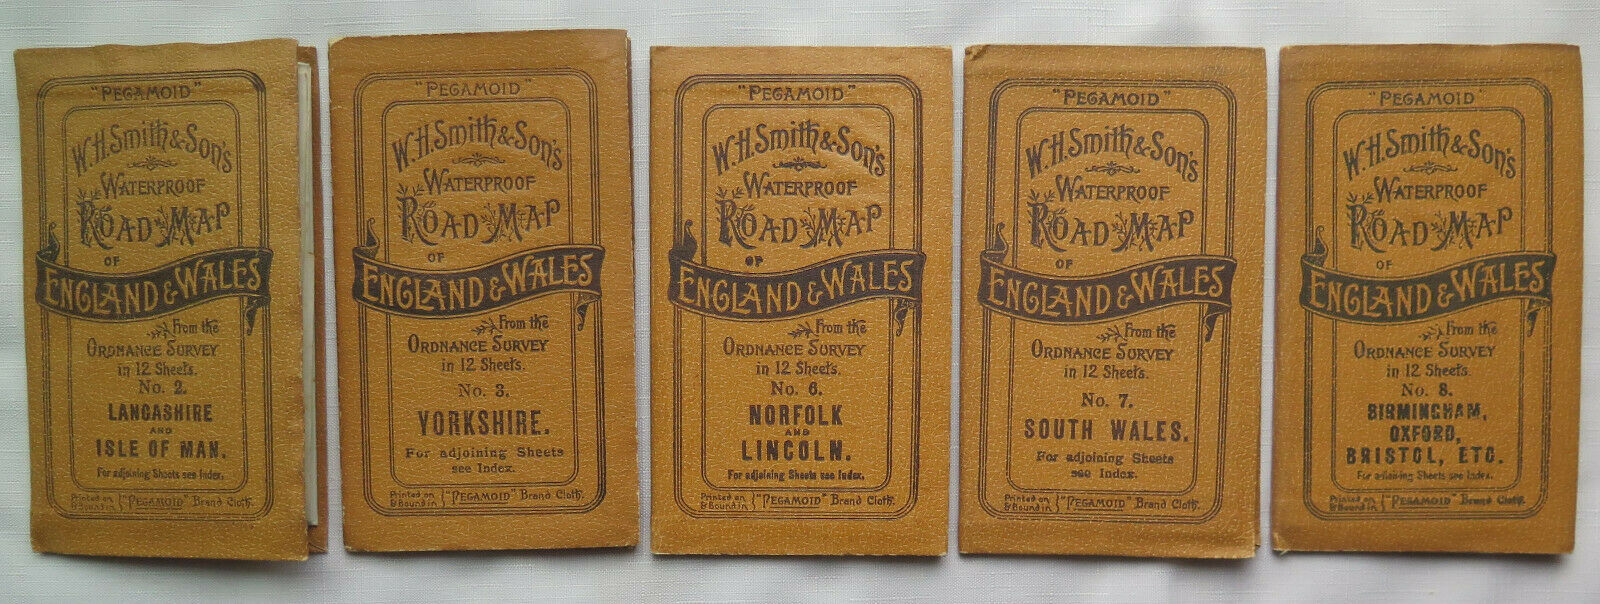 W.h.smith & Son's Waterproof Road Maps Of England & Wales - 9 In Total